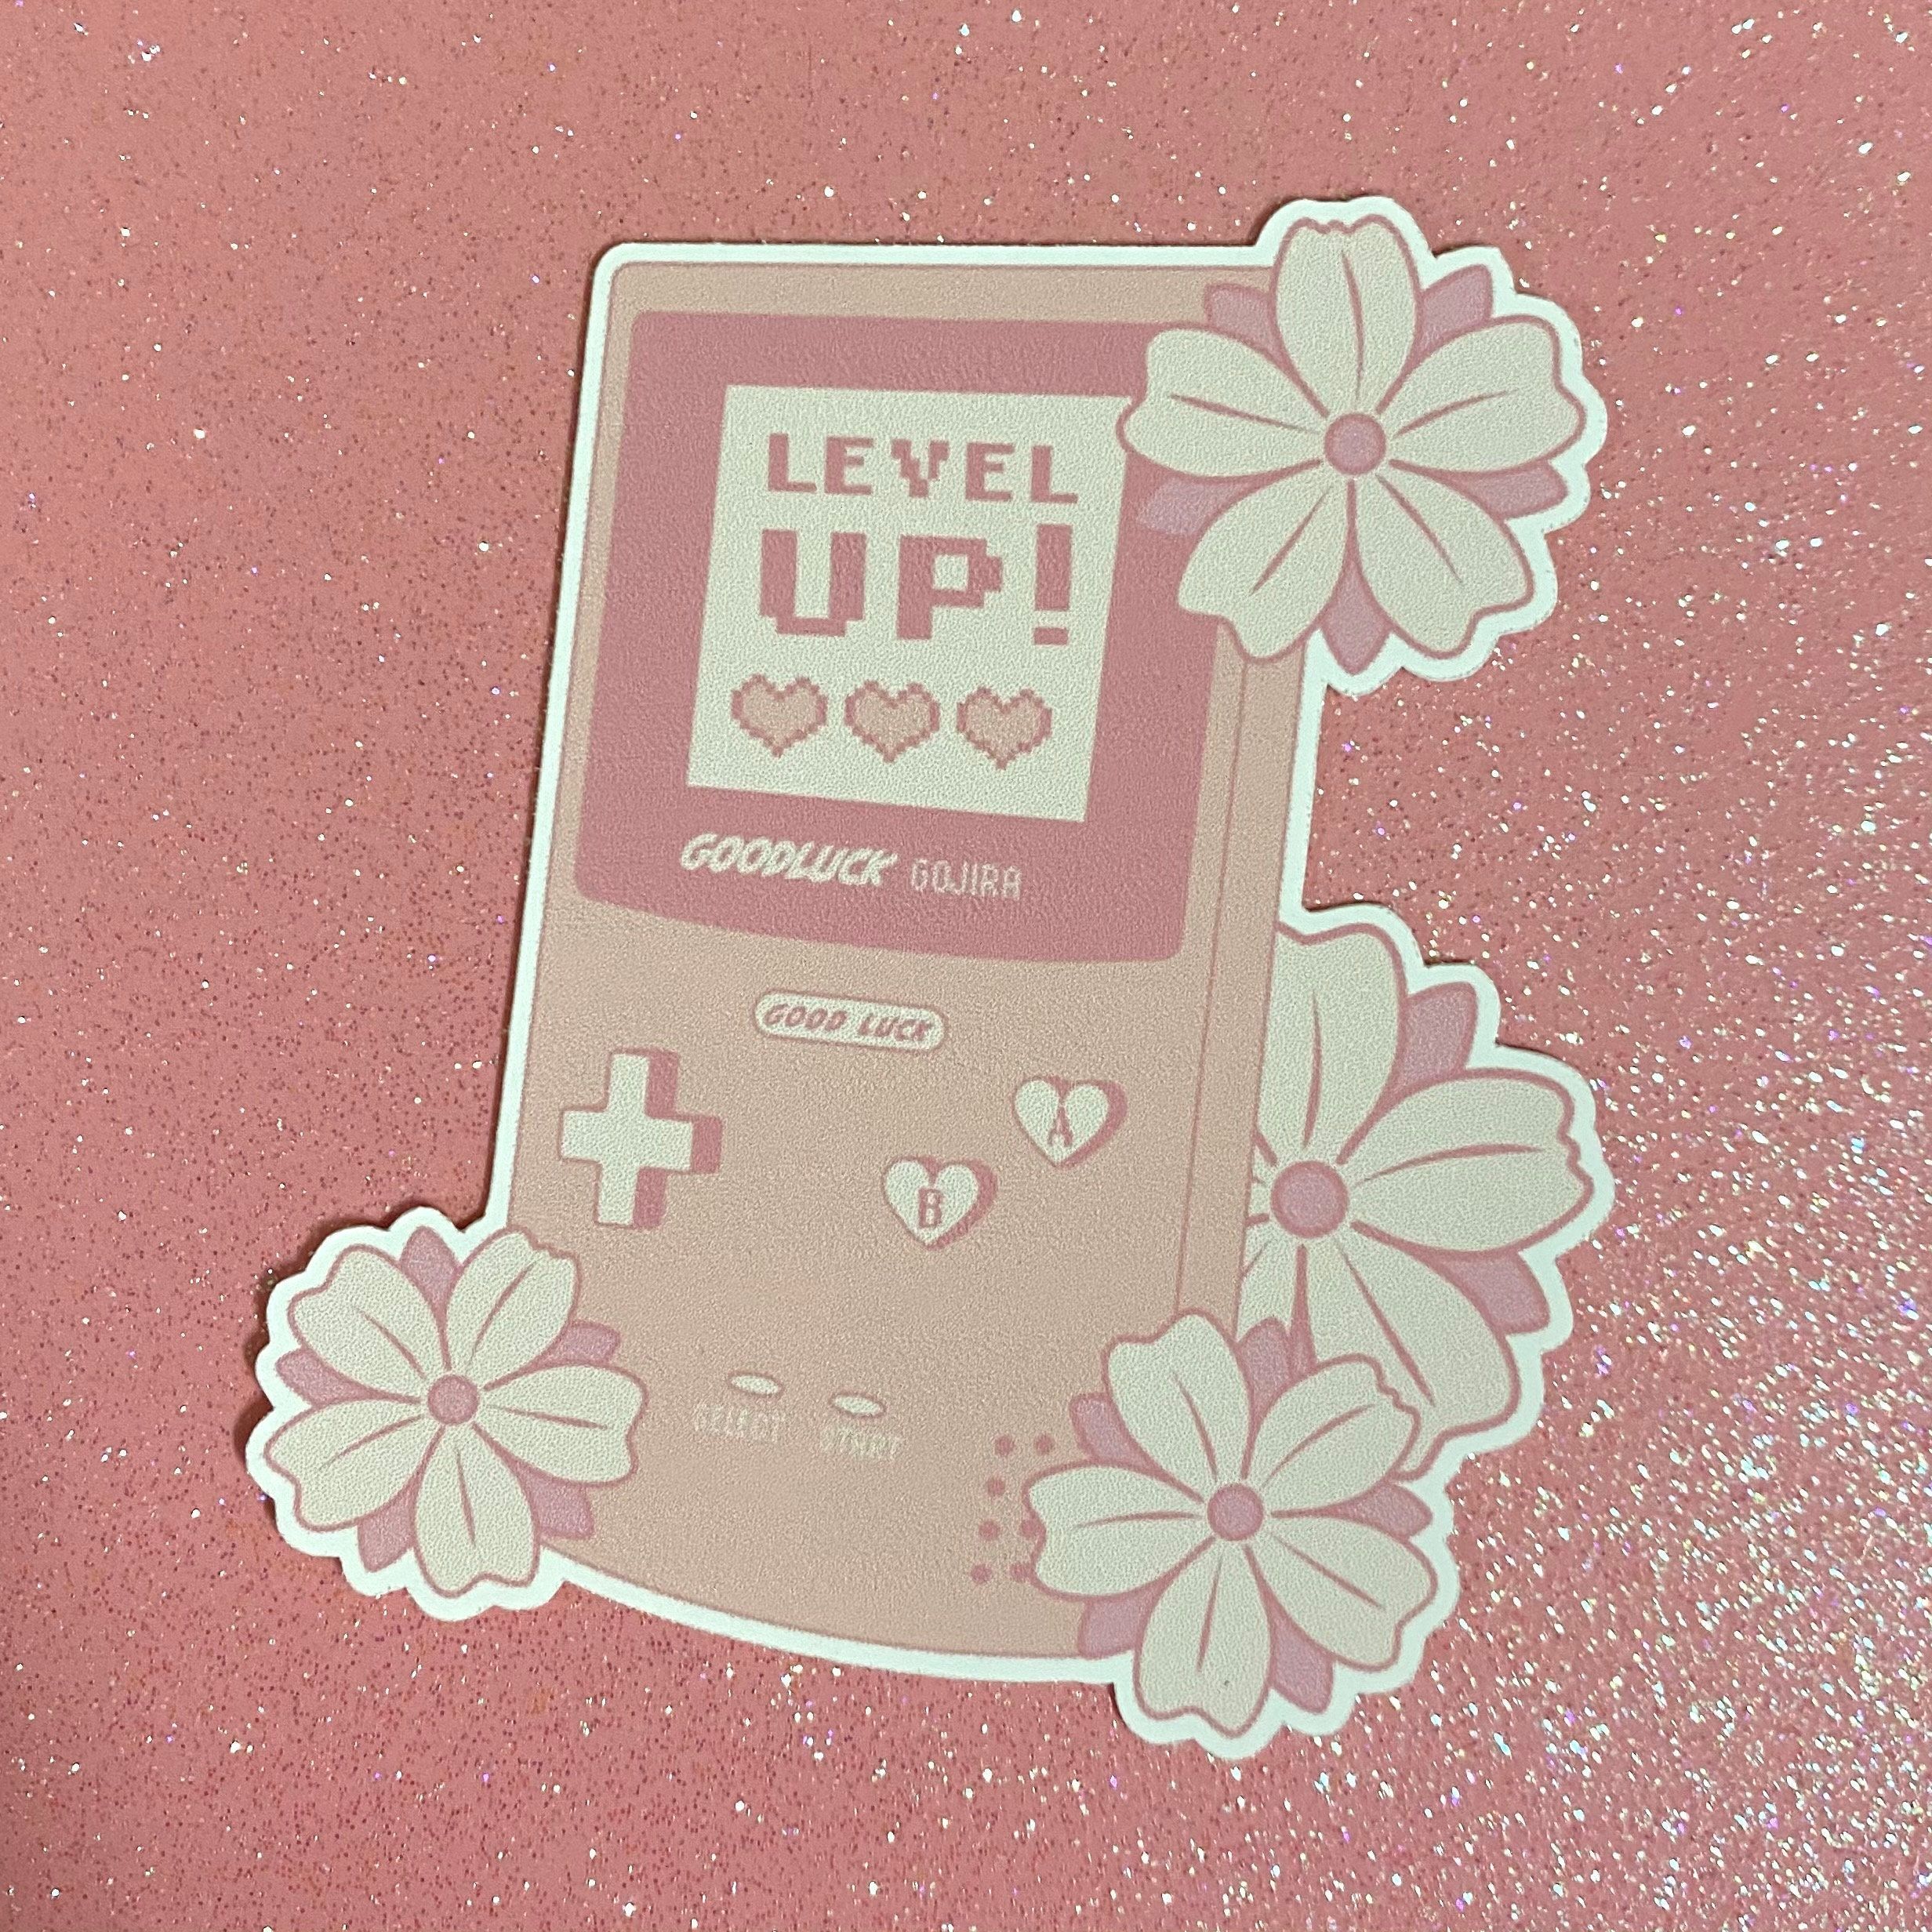 A sticker of a Gameboy with the words Level Up on it - Game Boy